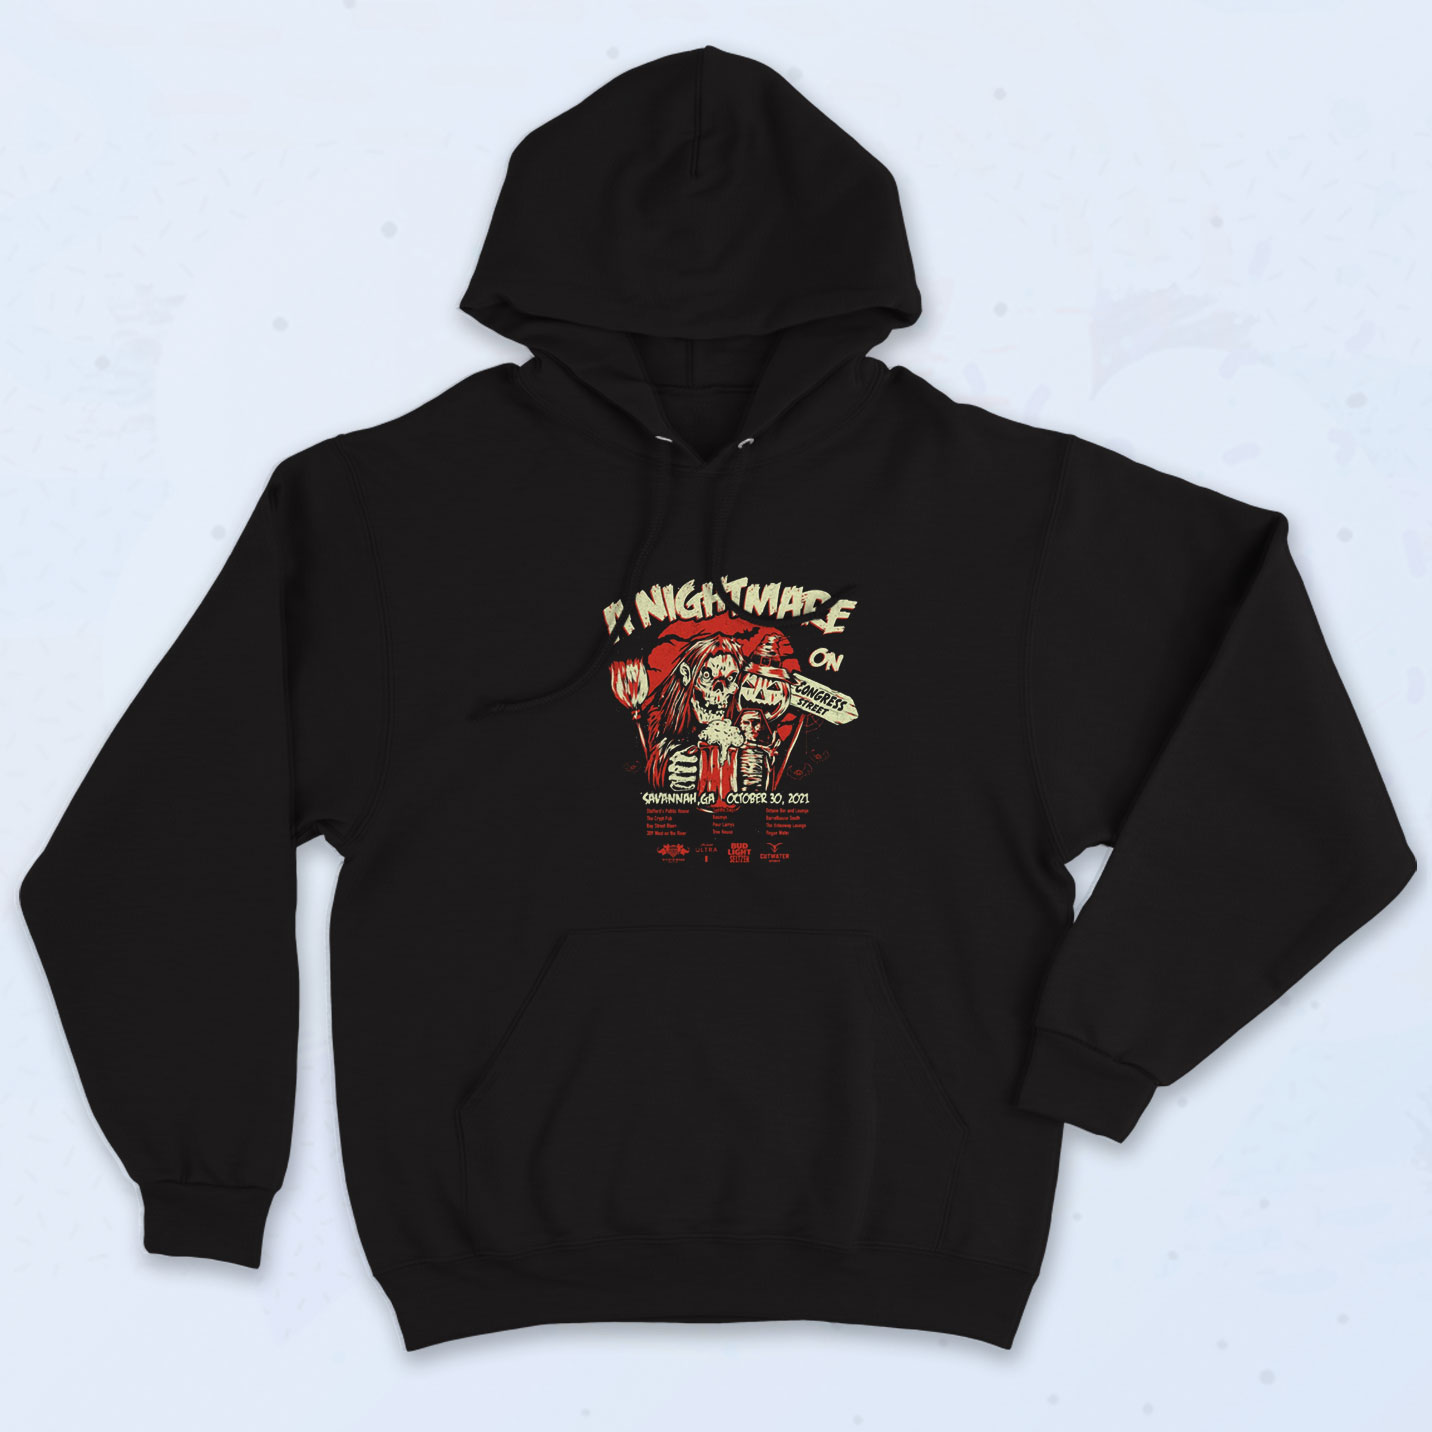 Nightmare On Congress Street Hoodie On Sale - 90sclothes.com